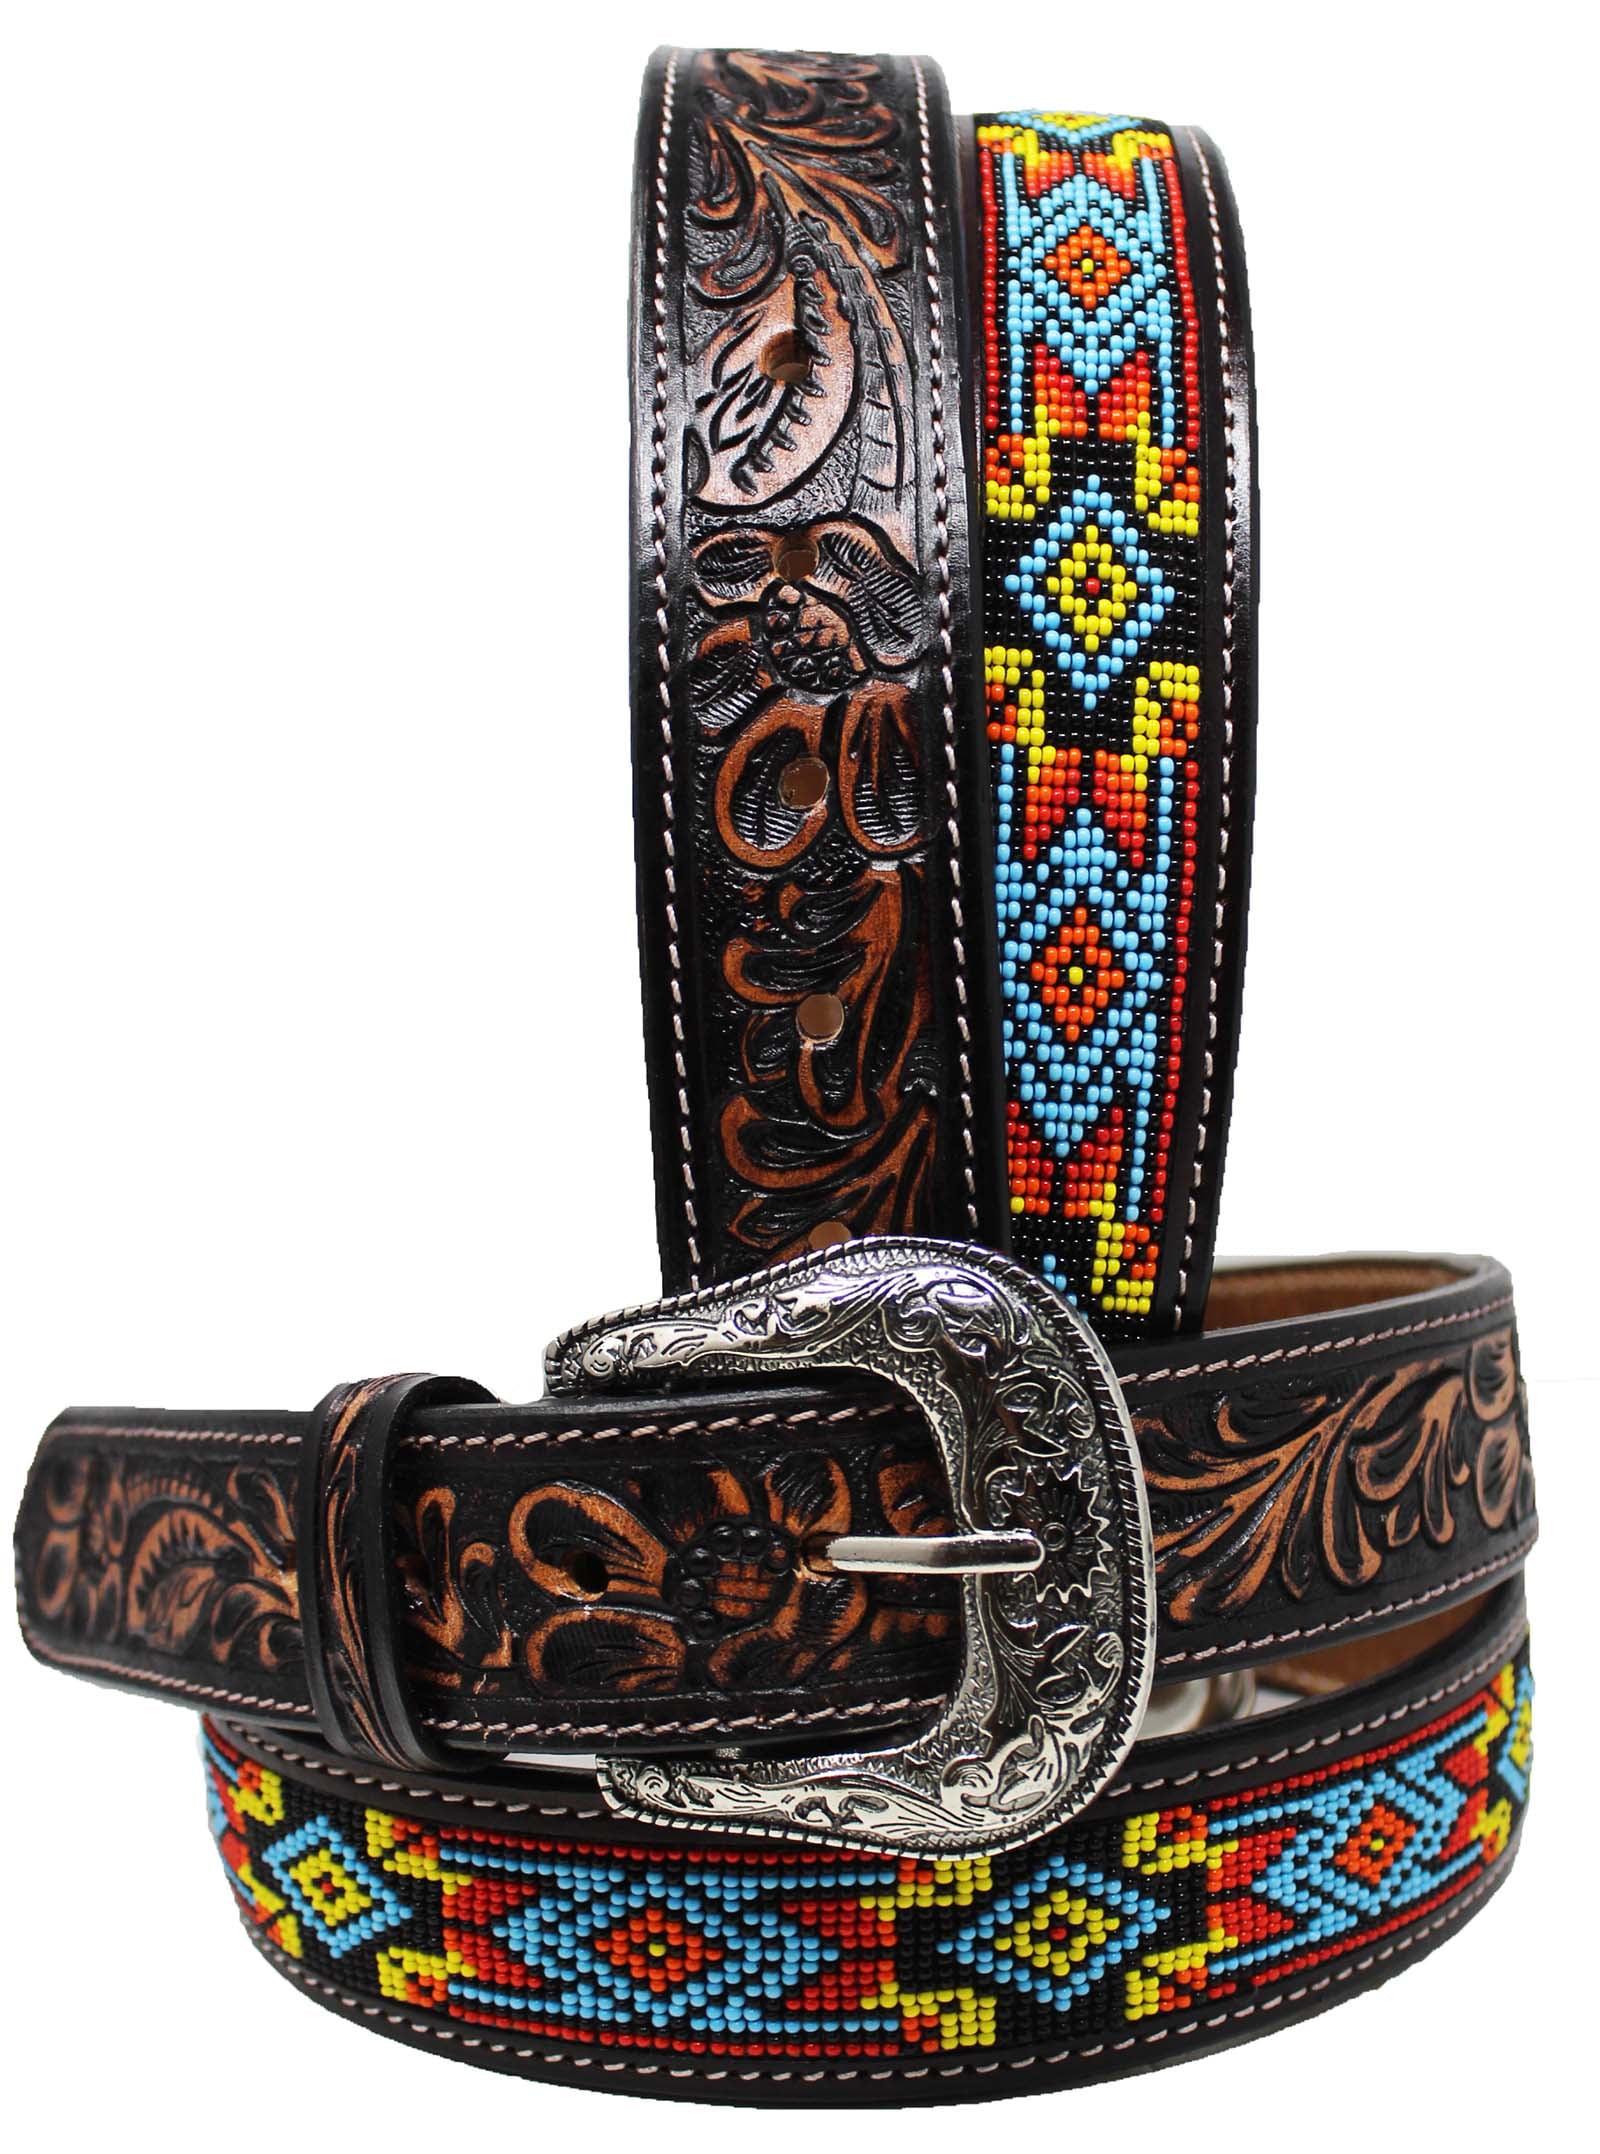 CHAOREN Mens Belts for Jeans 1.5 - Full Grain Leather Cowboy Belt - Crafted by Hand